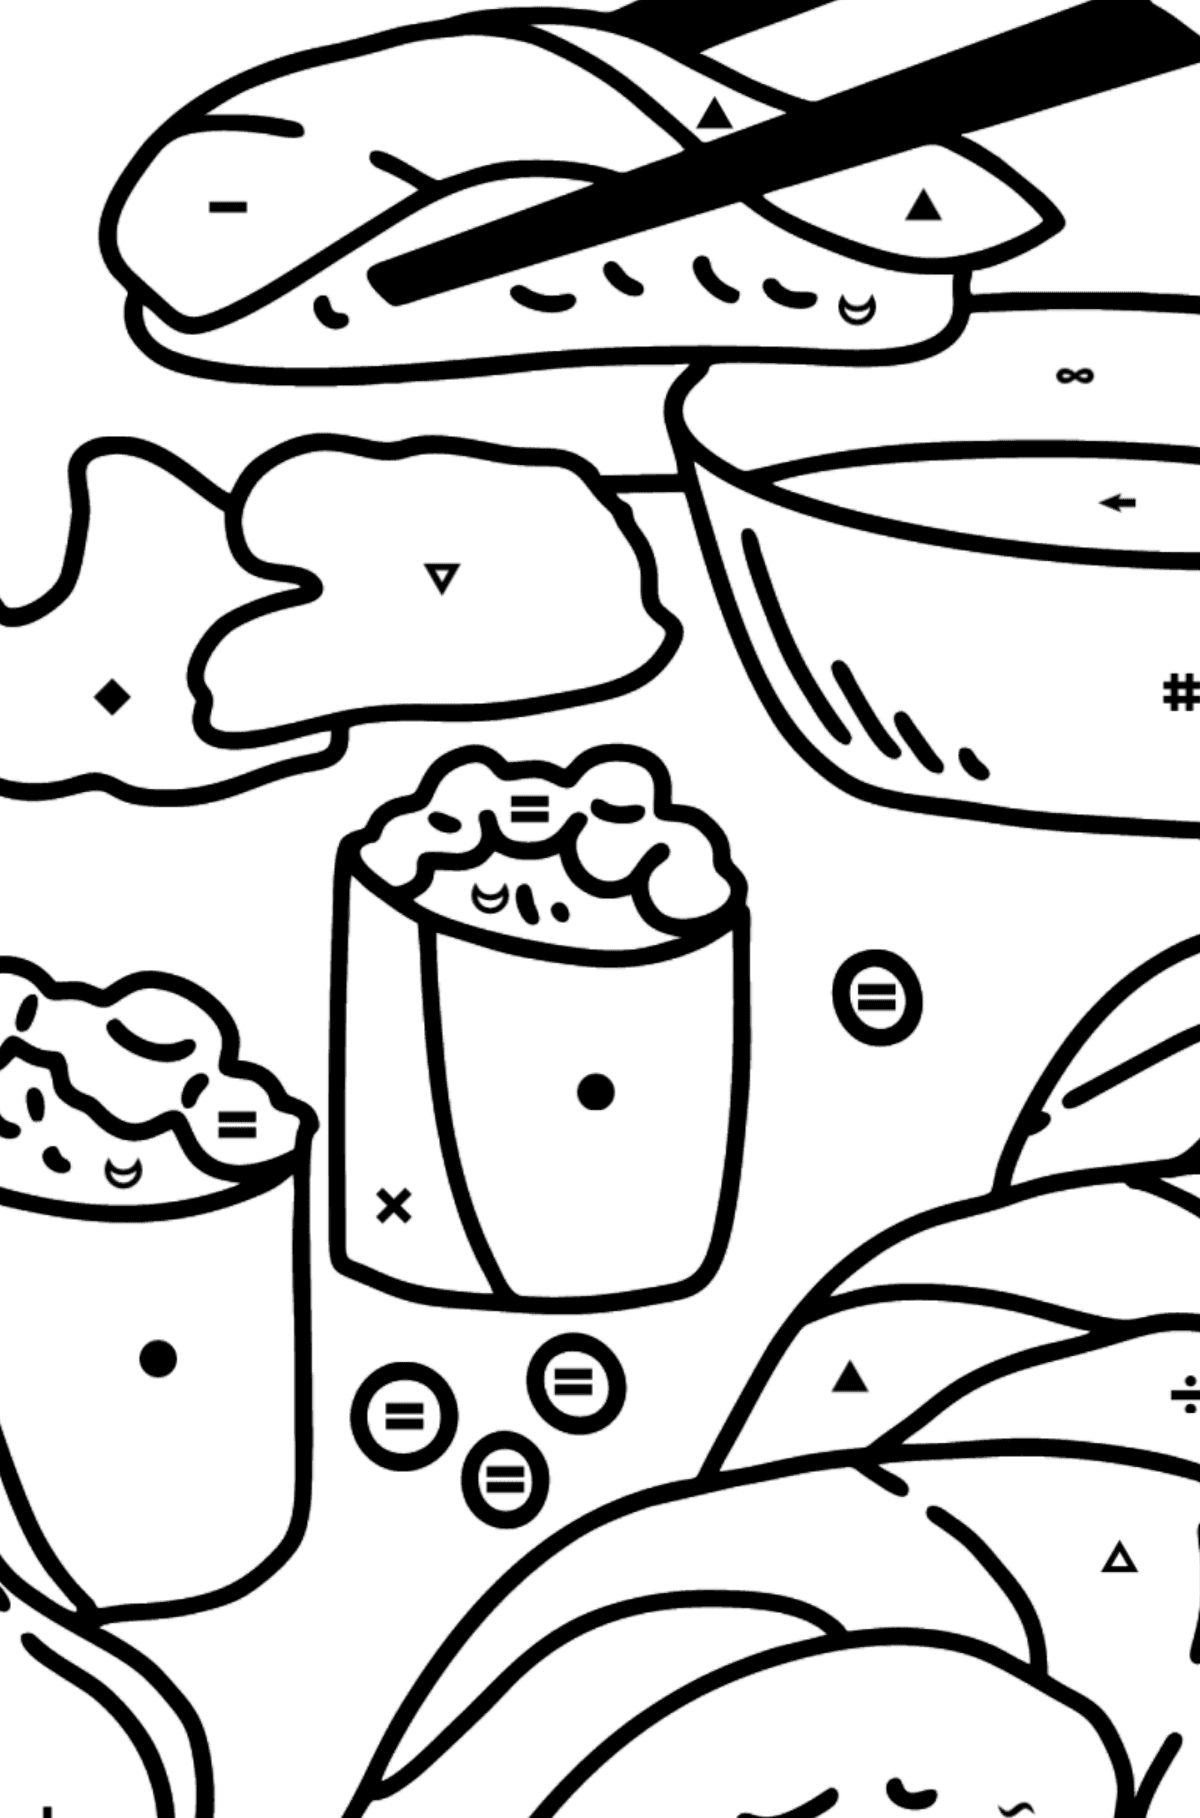 Sushi coloring page - Coloring by Symbols for Kids